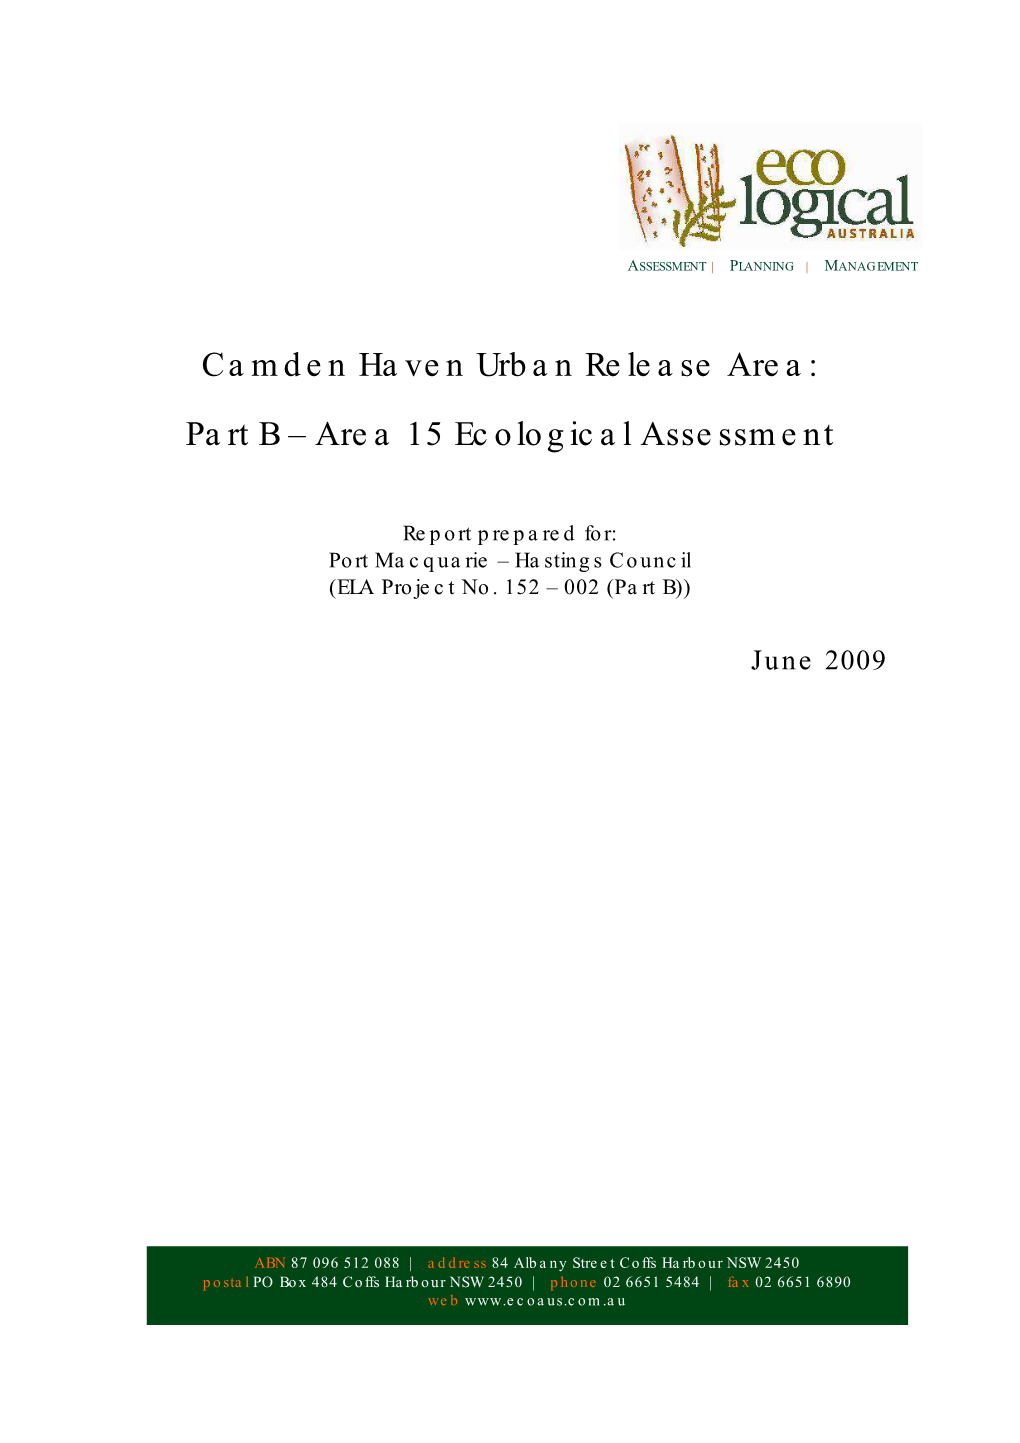 Area 15 Ecological Assessment